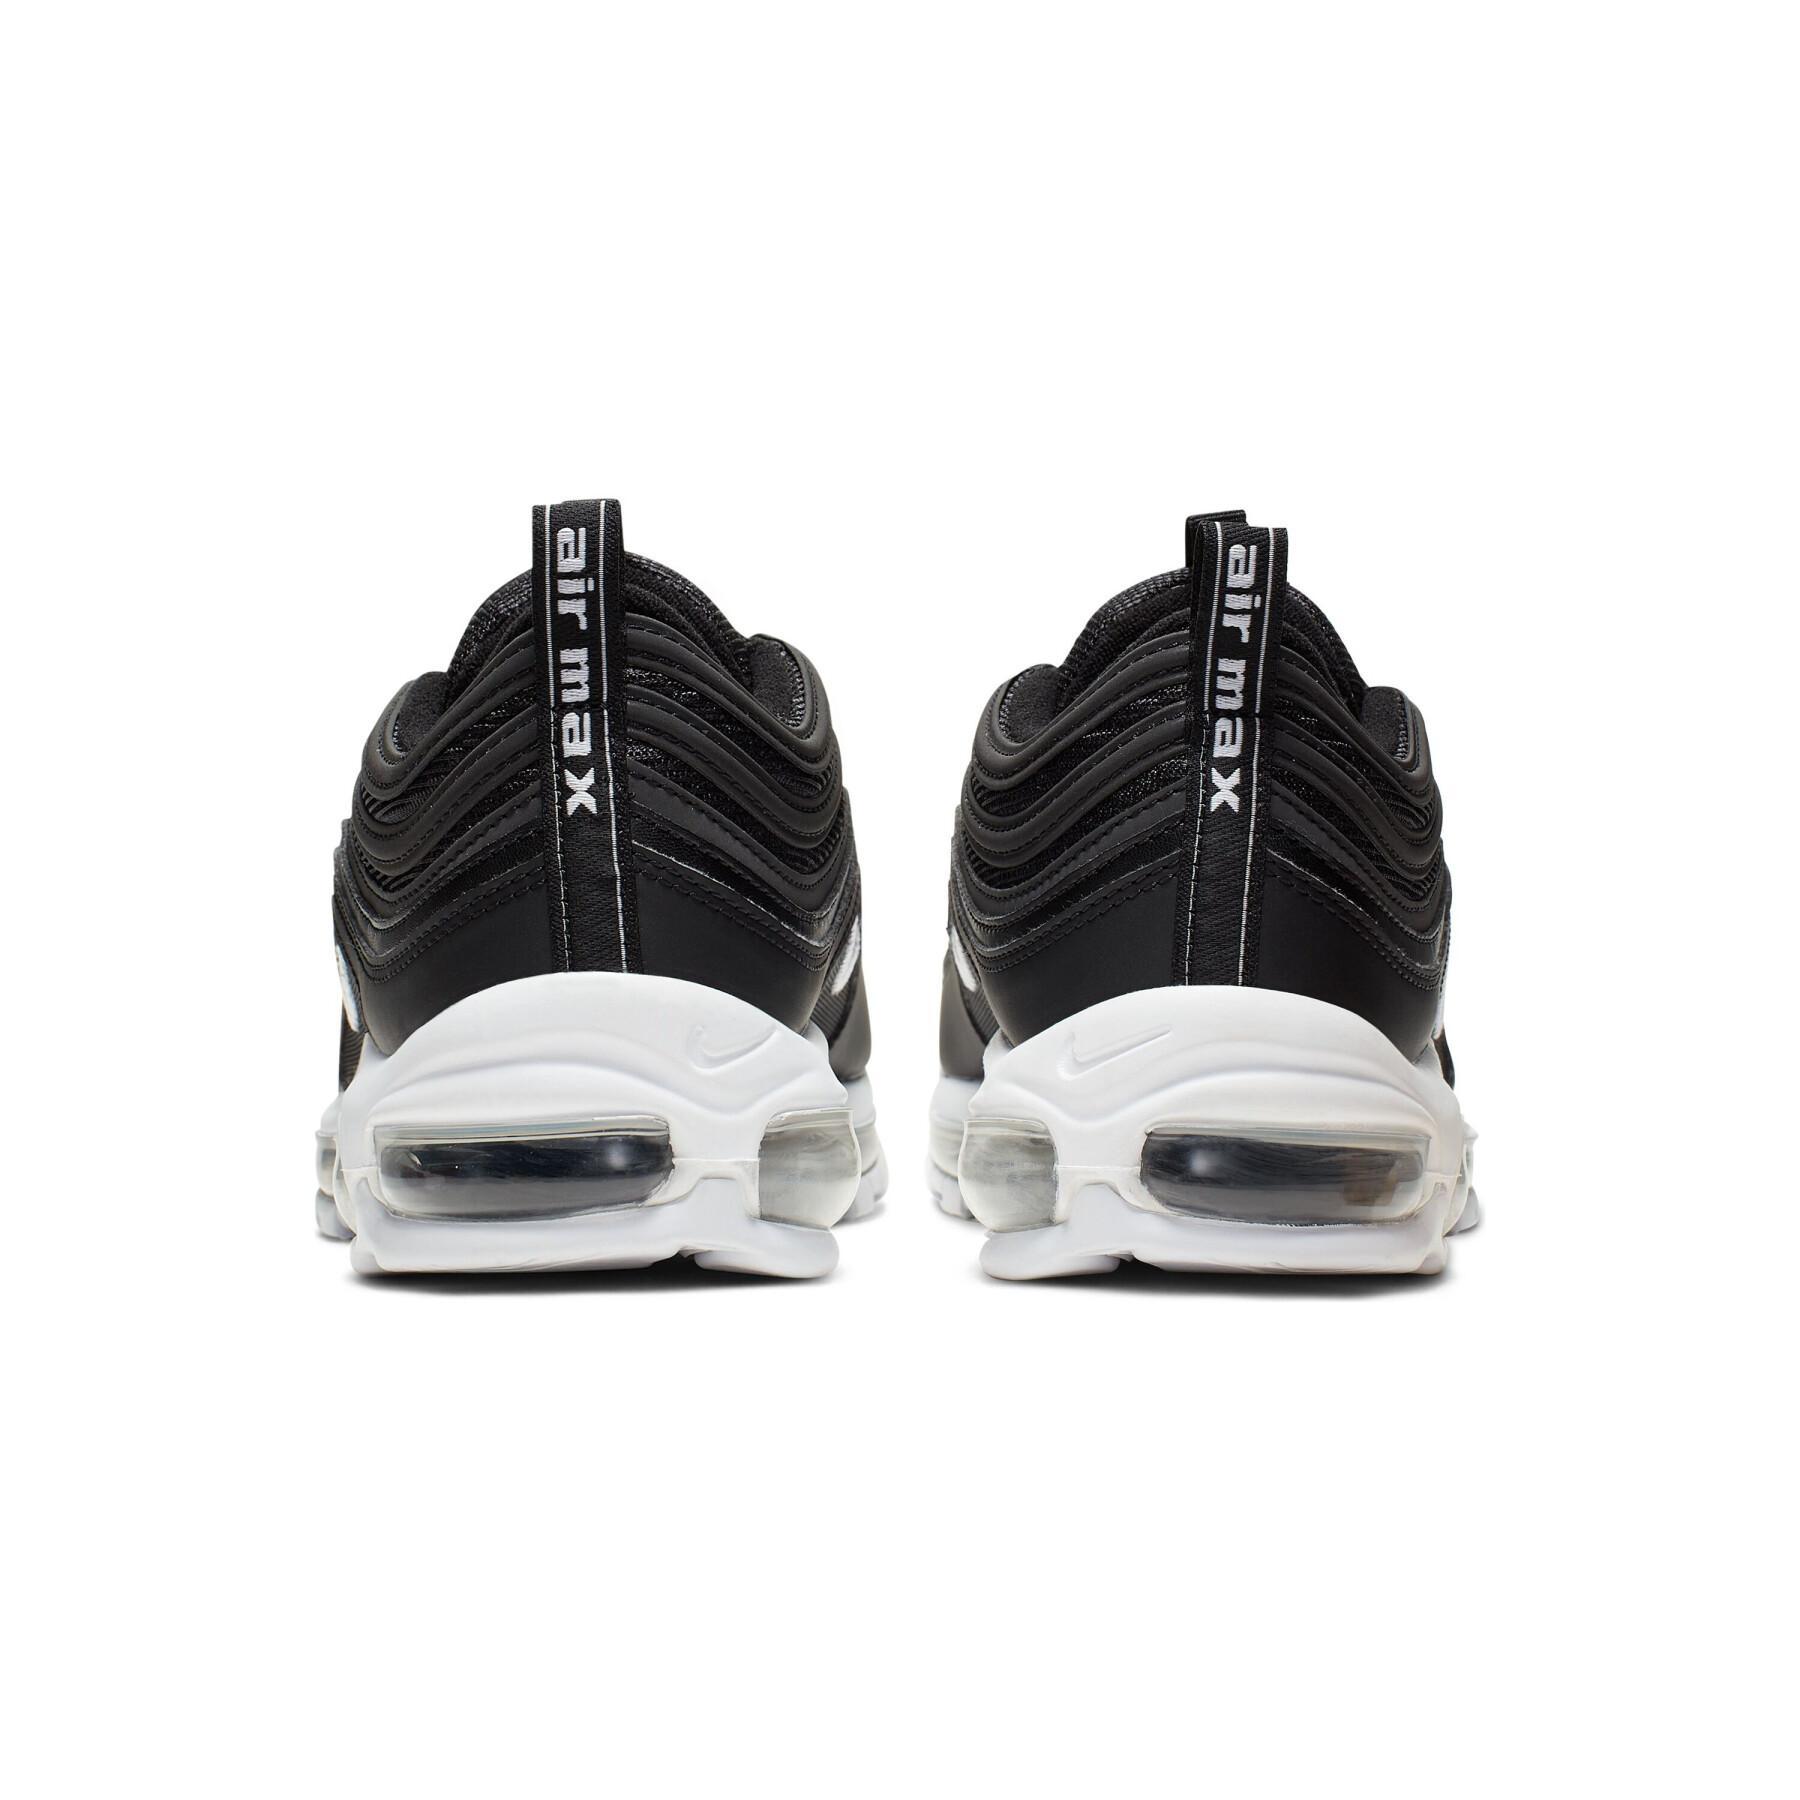 Formadores Nike Air Max 97